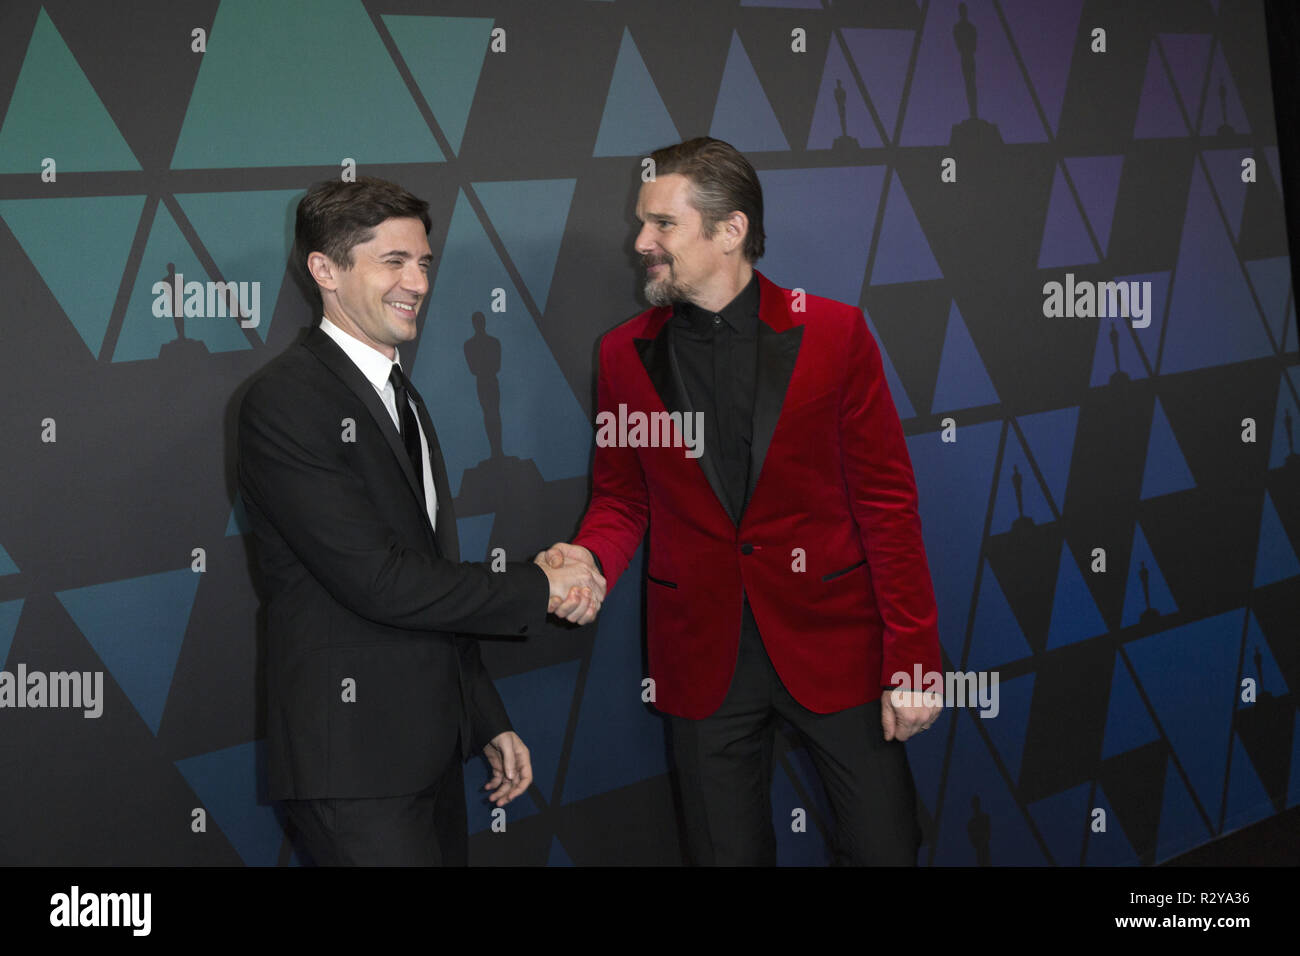 Topher Grace and Ethan Hawke attends the Academy’s 2018 Annual Governors Awards in The Ray Dolby Ballroom at Hollywood & Highland Center in Hollywood, CA, on Sunday, November 18, 2018. Stock Photo